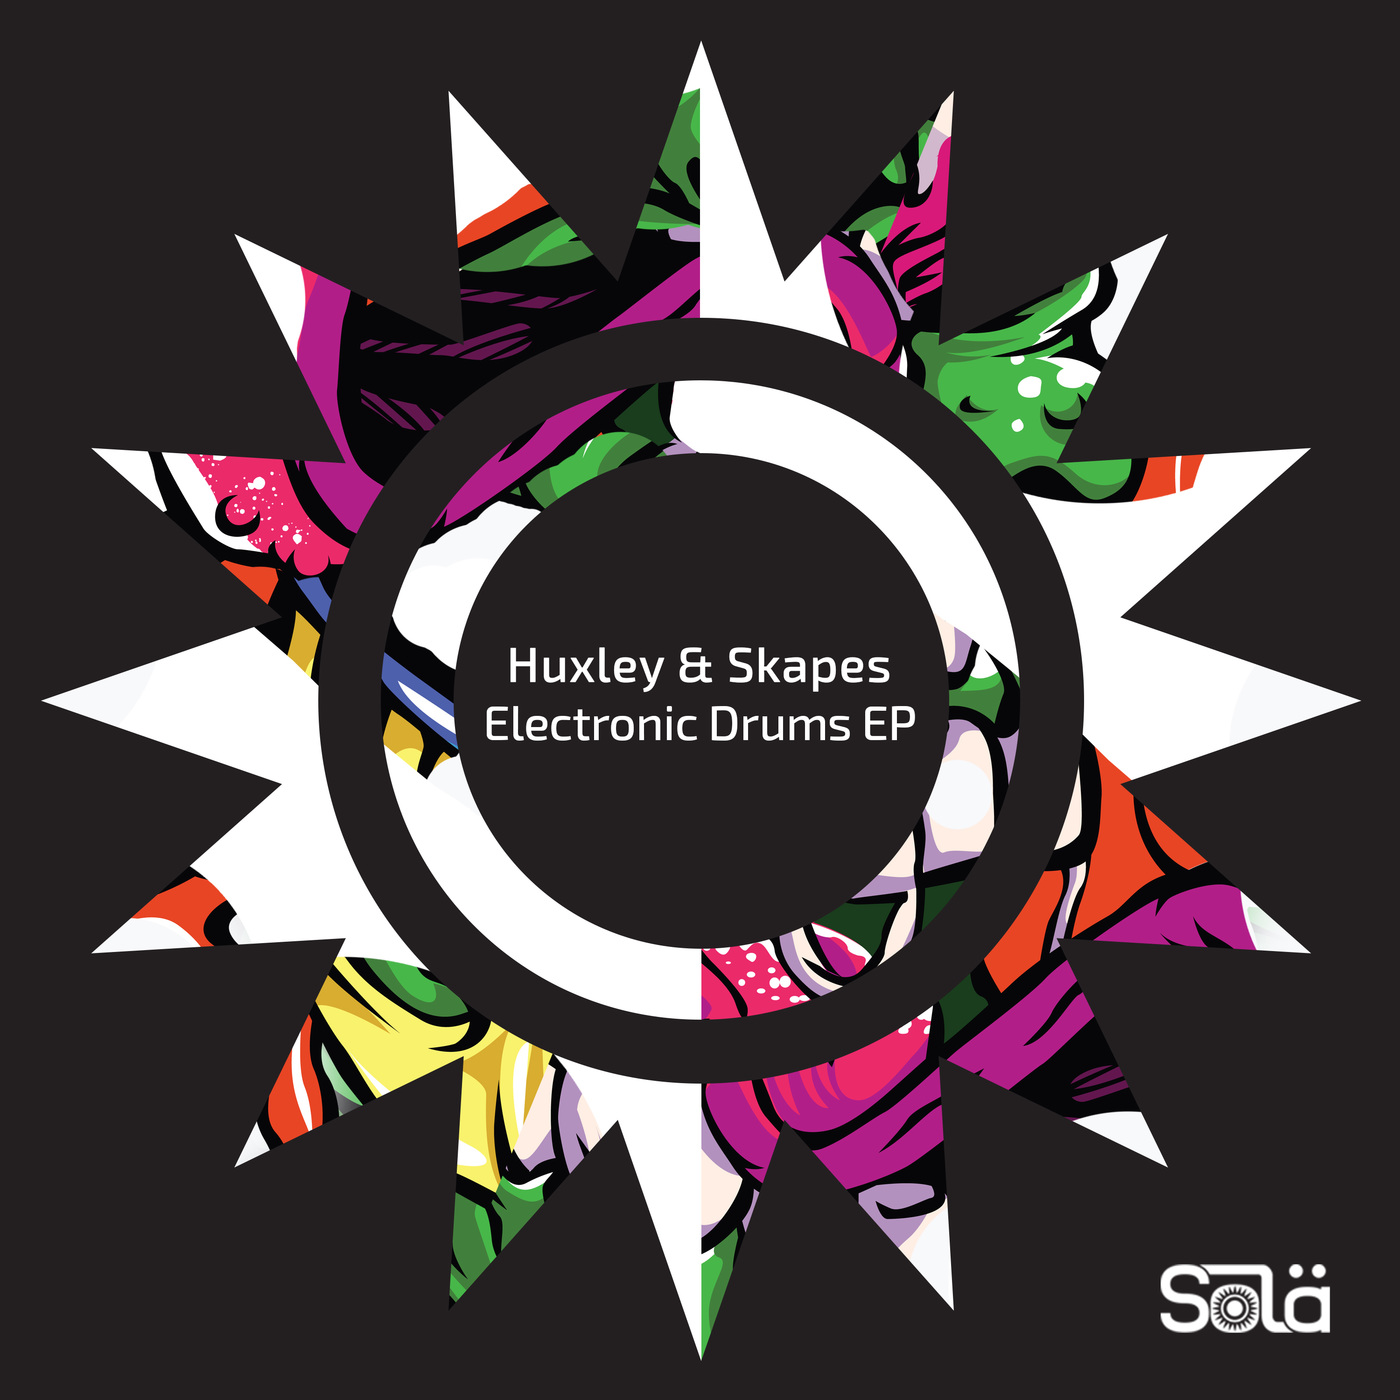 Huxley & Skapes - Electronic Drums EP / Sola